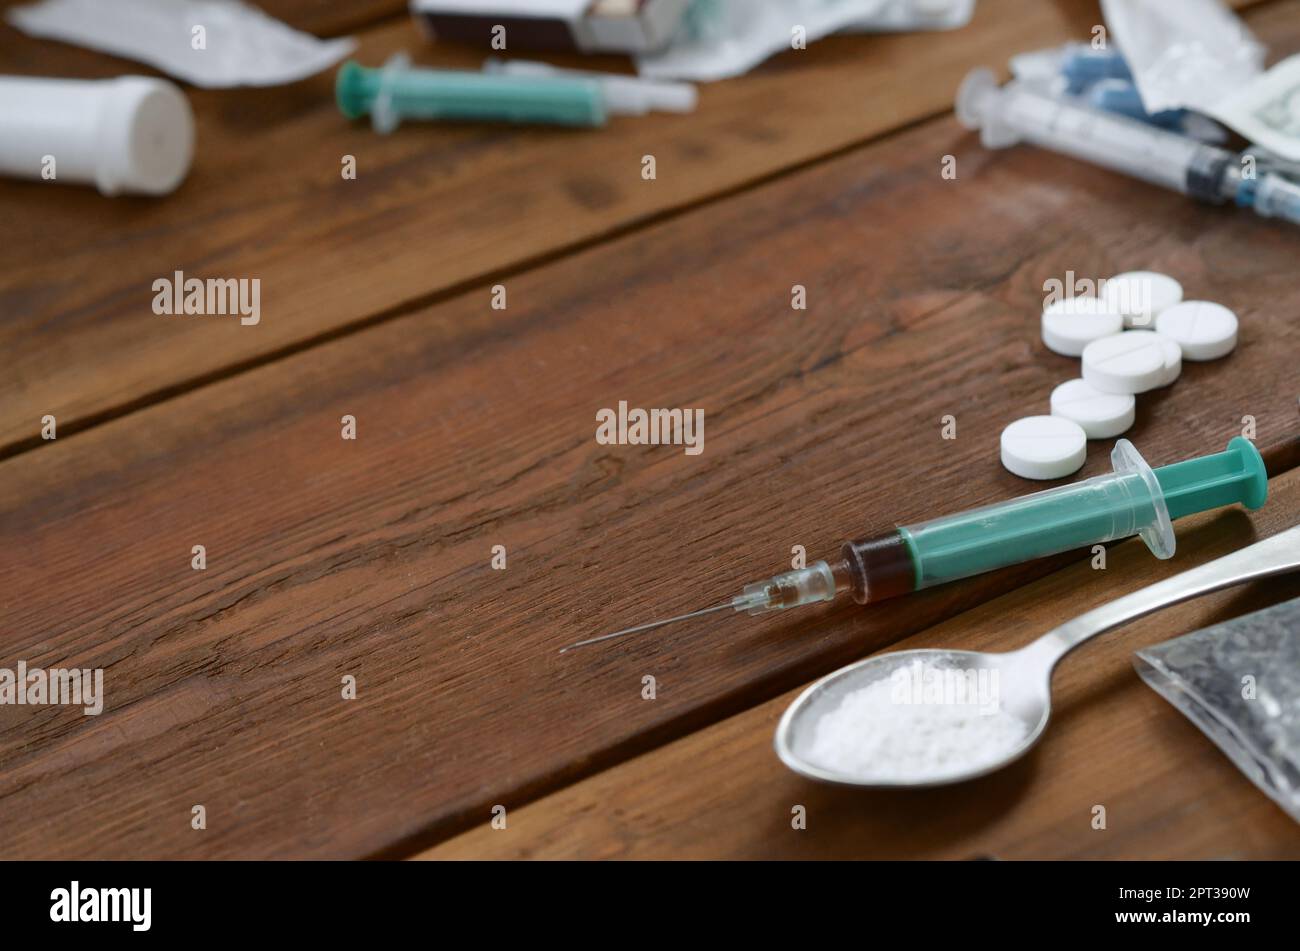 A lot of narcotic substances and devices for the preparation of drugs lie on an old wooden table. Drug dealer stuff. Heroin and methamphetamine in raw Stock Photo